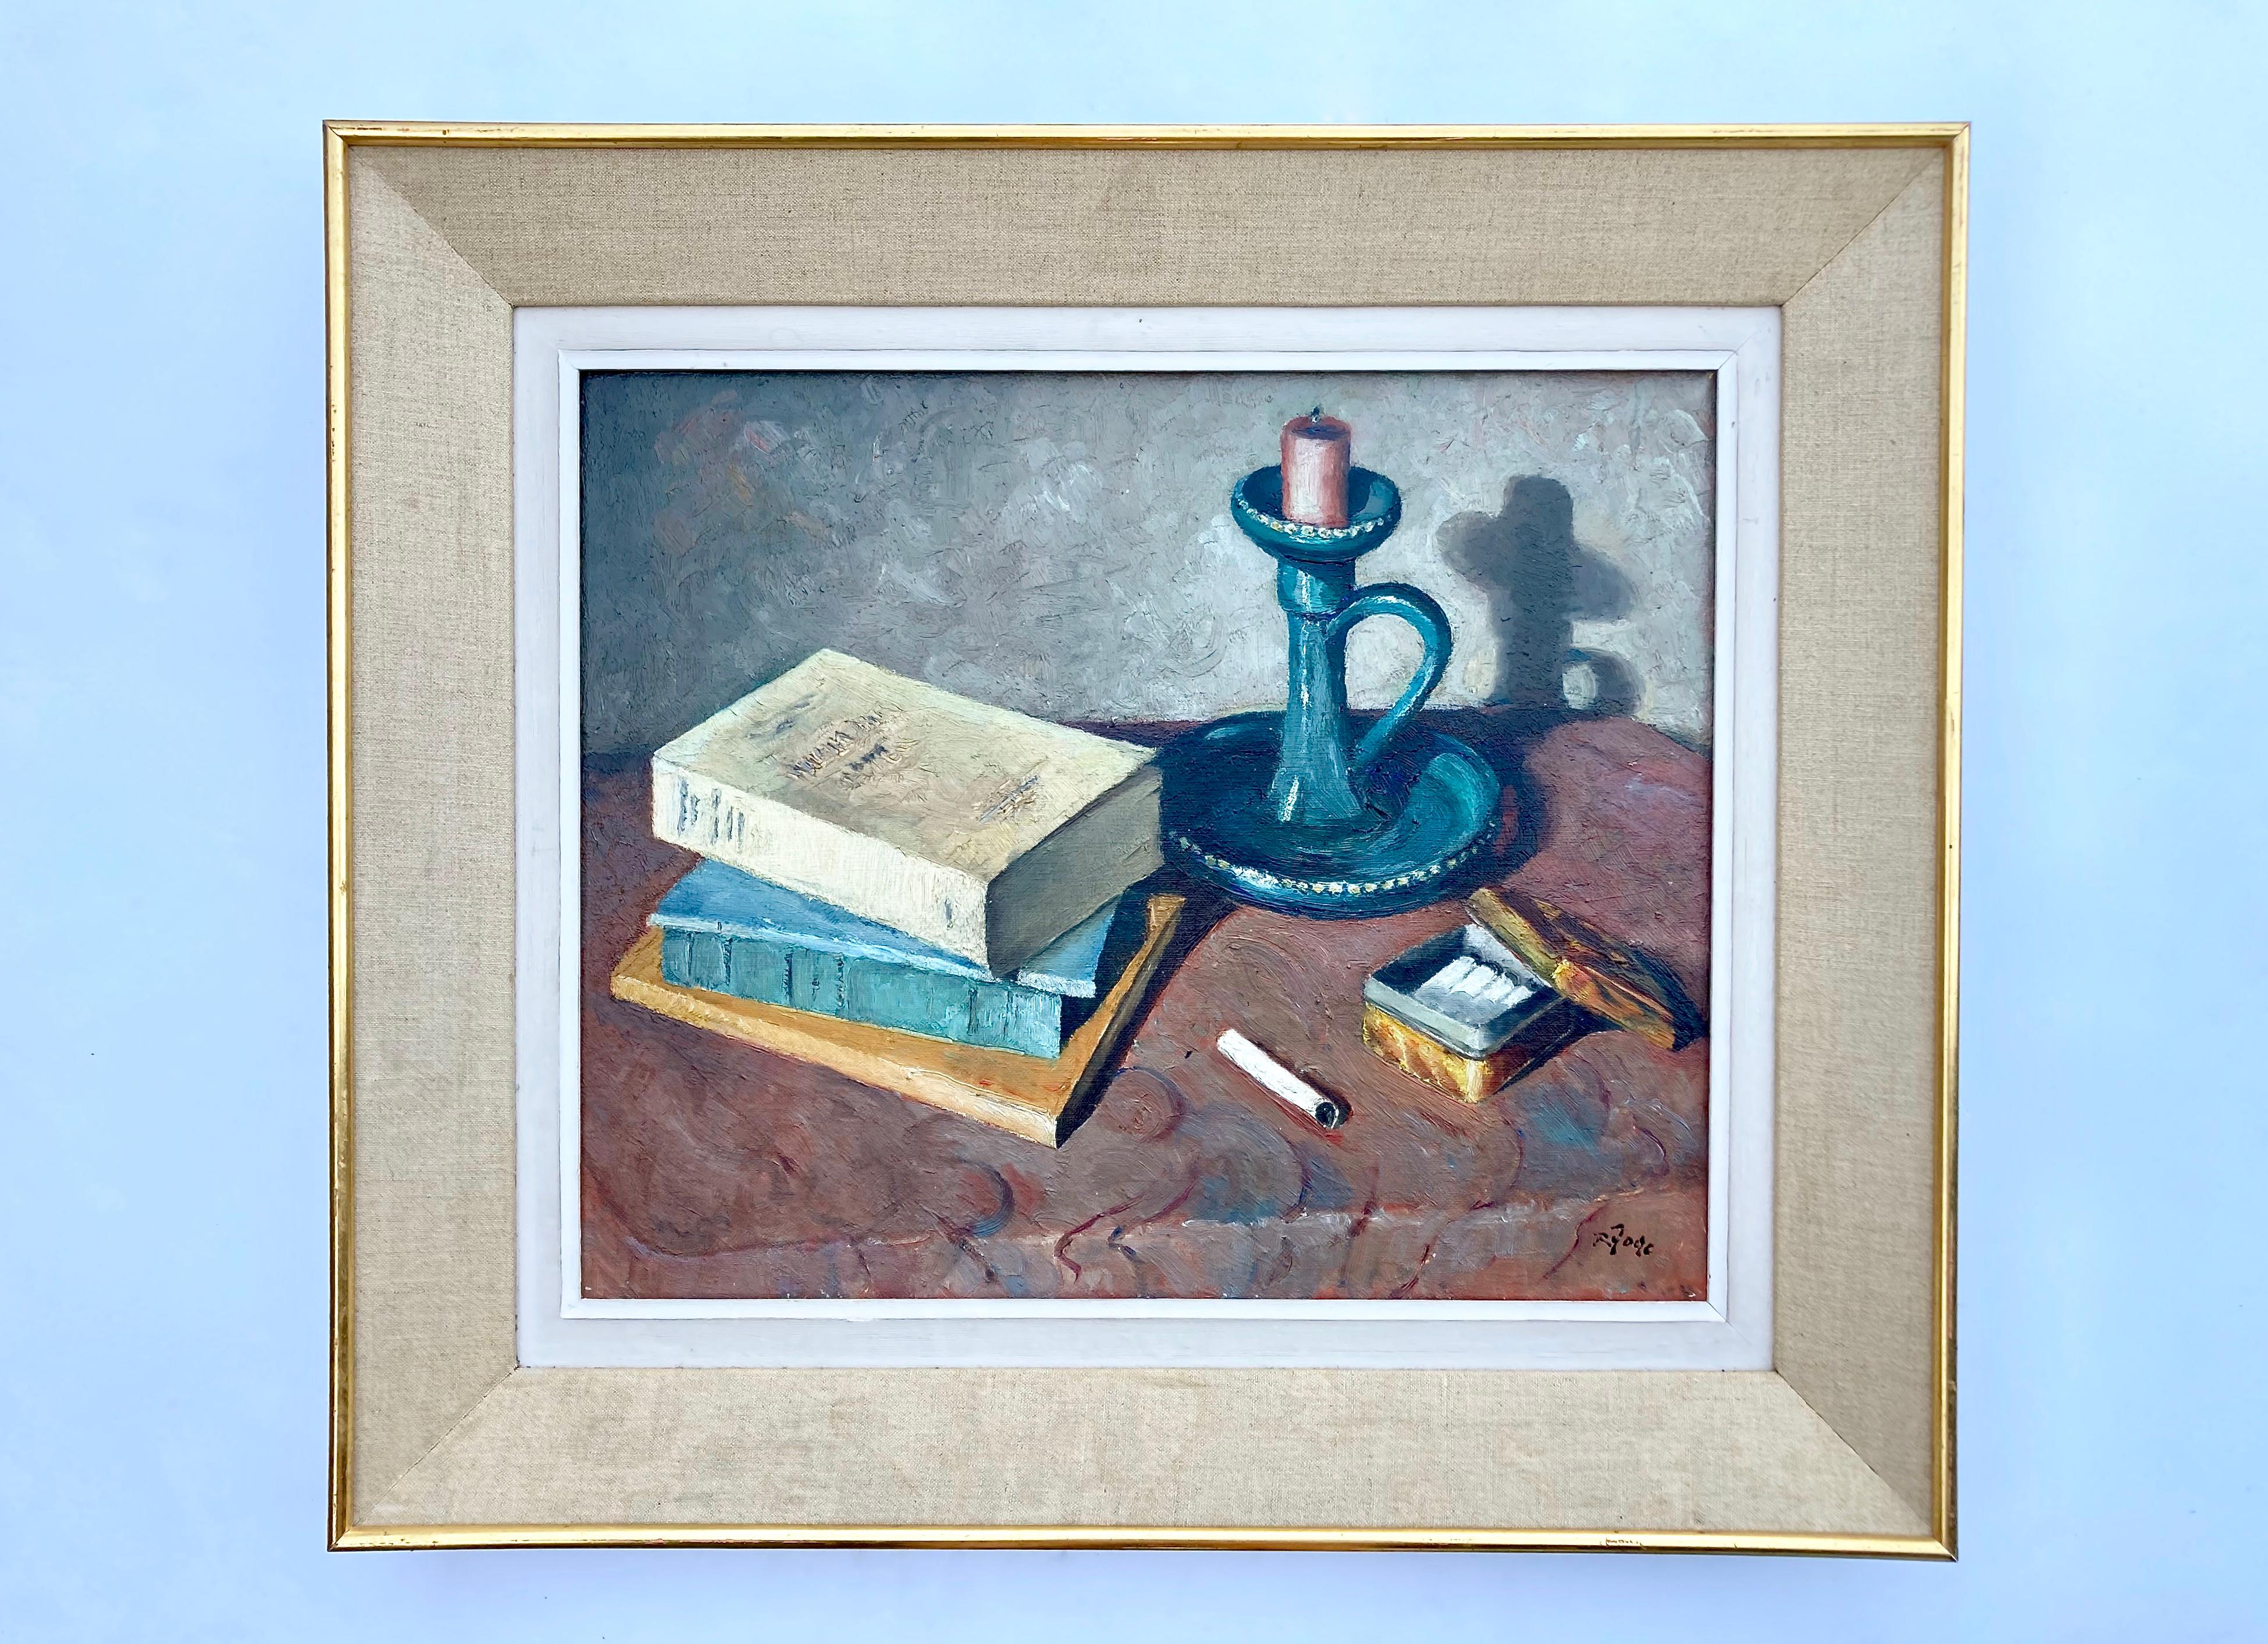 A wonderful still-life by French painter Rodolpe Fogé (1890-1976). He lived and worked in the Alsace region in north-eastern France and is mostly known for his local landscape paintings. This rare still-life is according to the typewriter label on